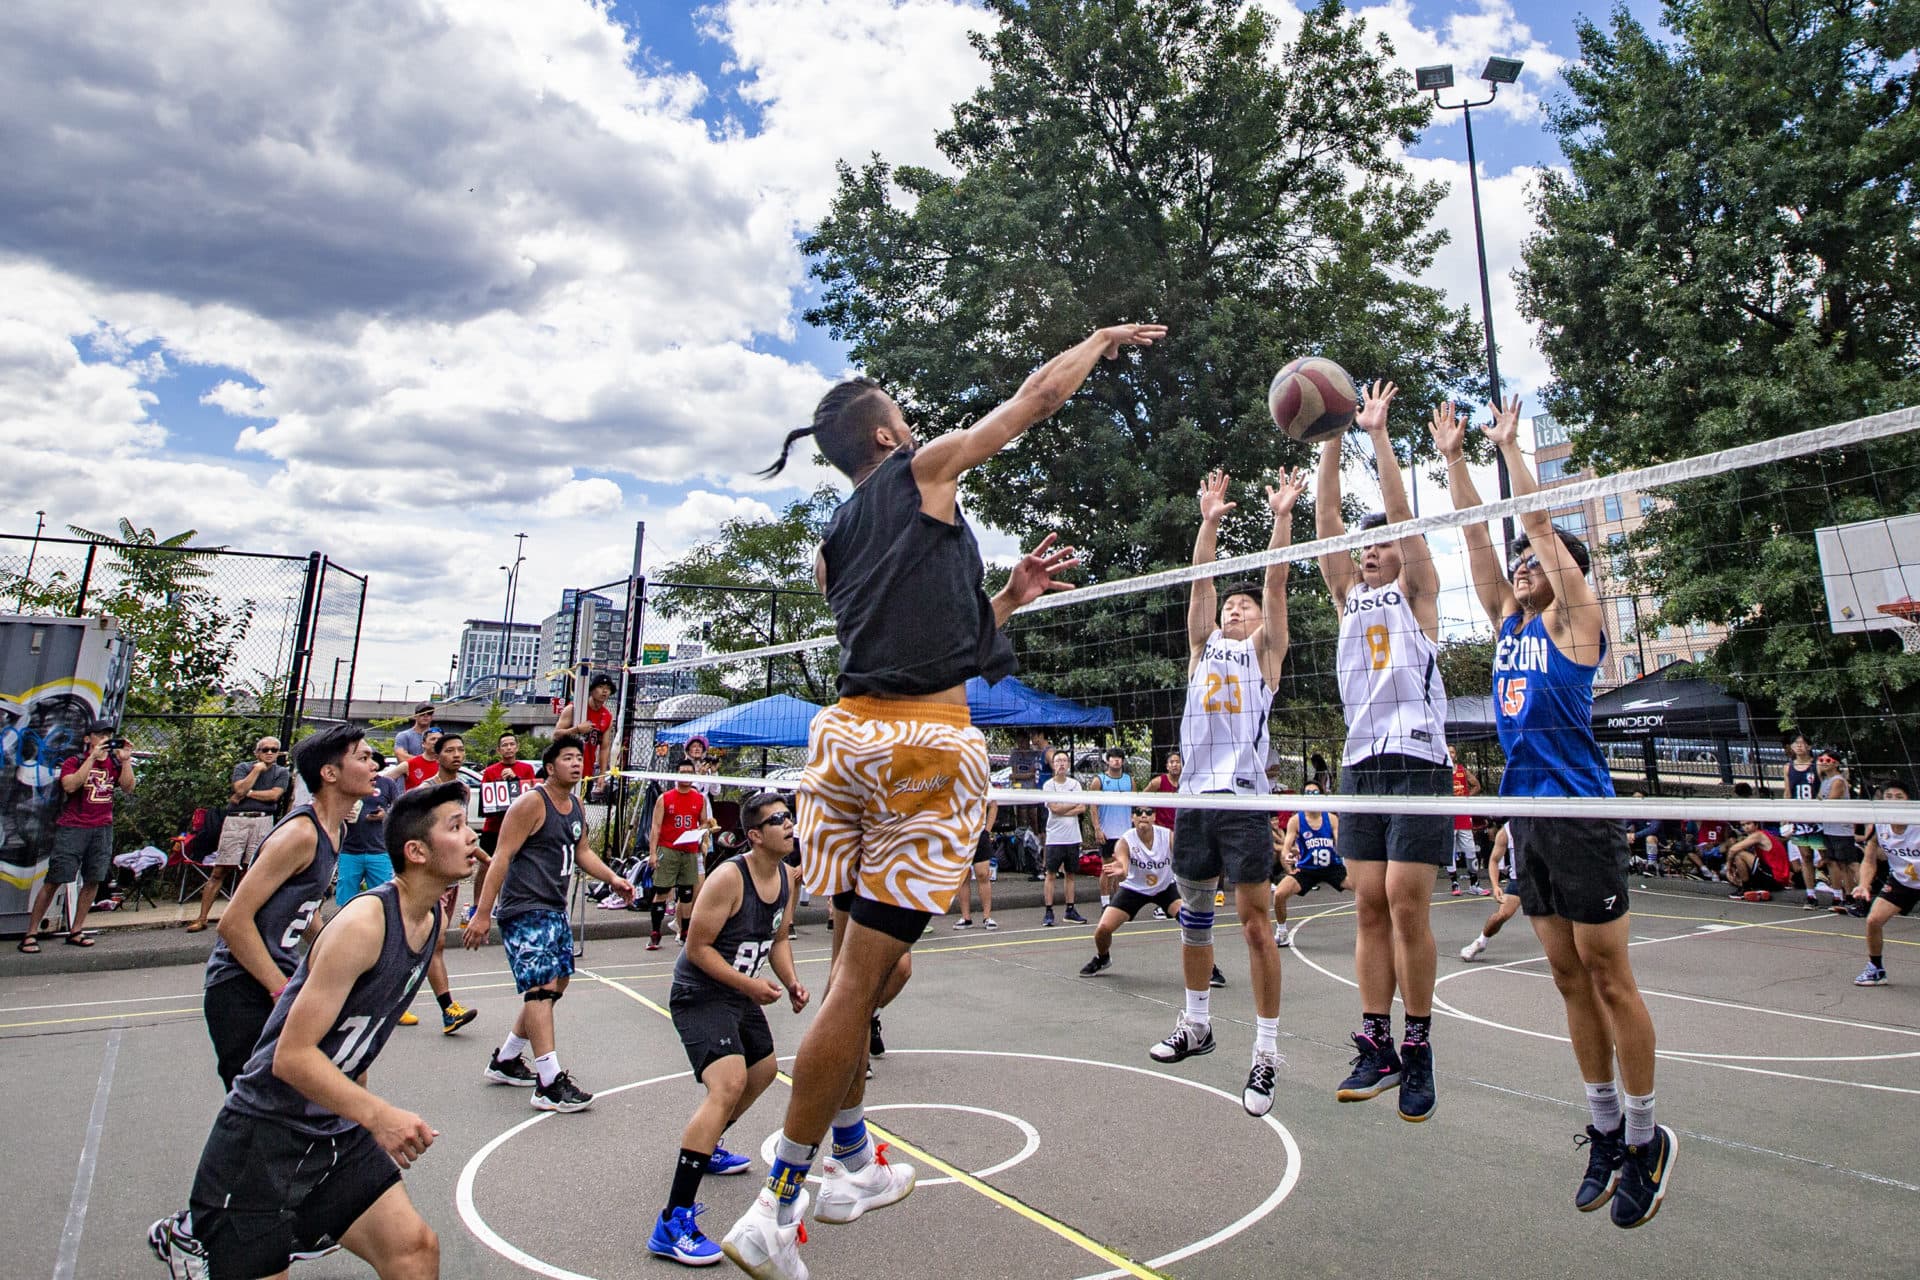 The Boston Hurricanes' defenders attempt to block a spike in a match against the Boston Rising Tide at Reggie Wong Memorial Park in Chinatown. (Jesse Costa/WBUR)